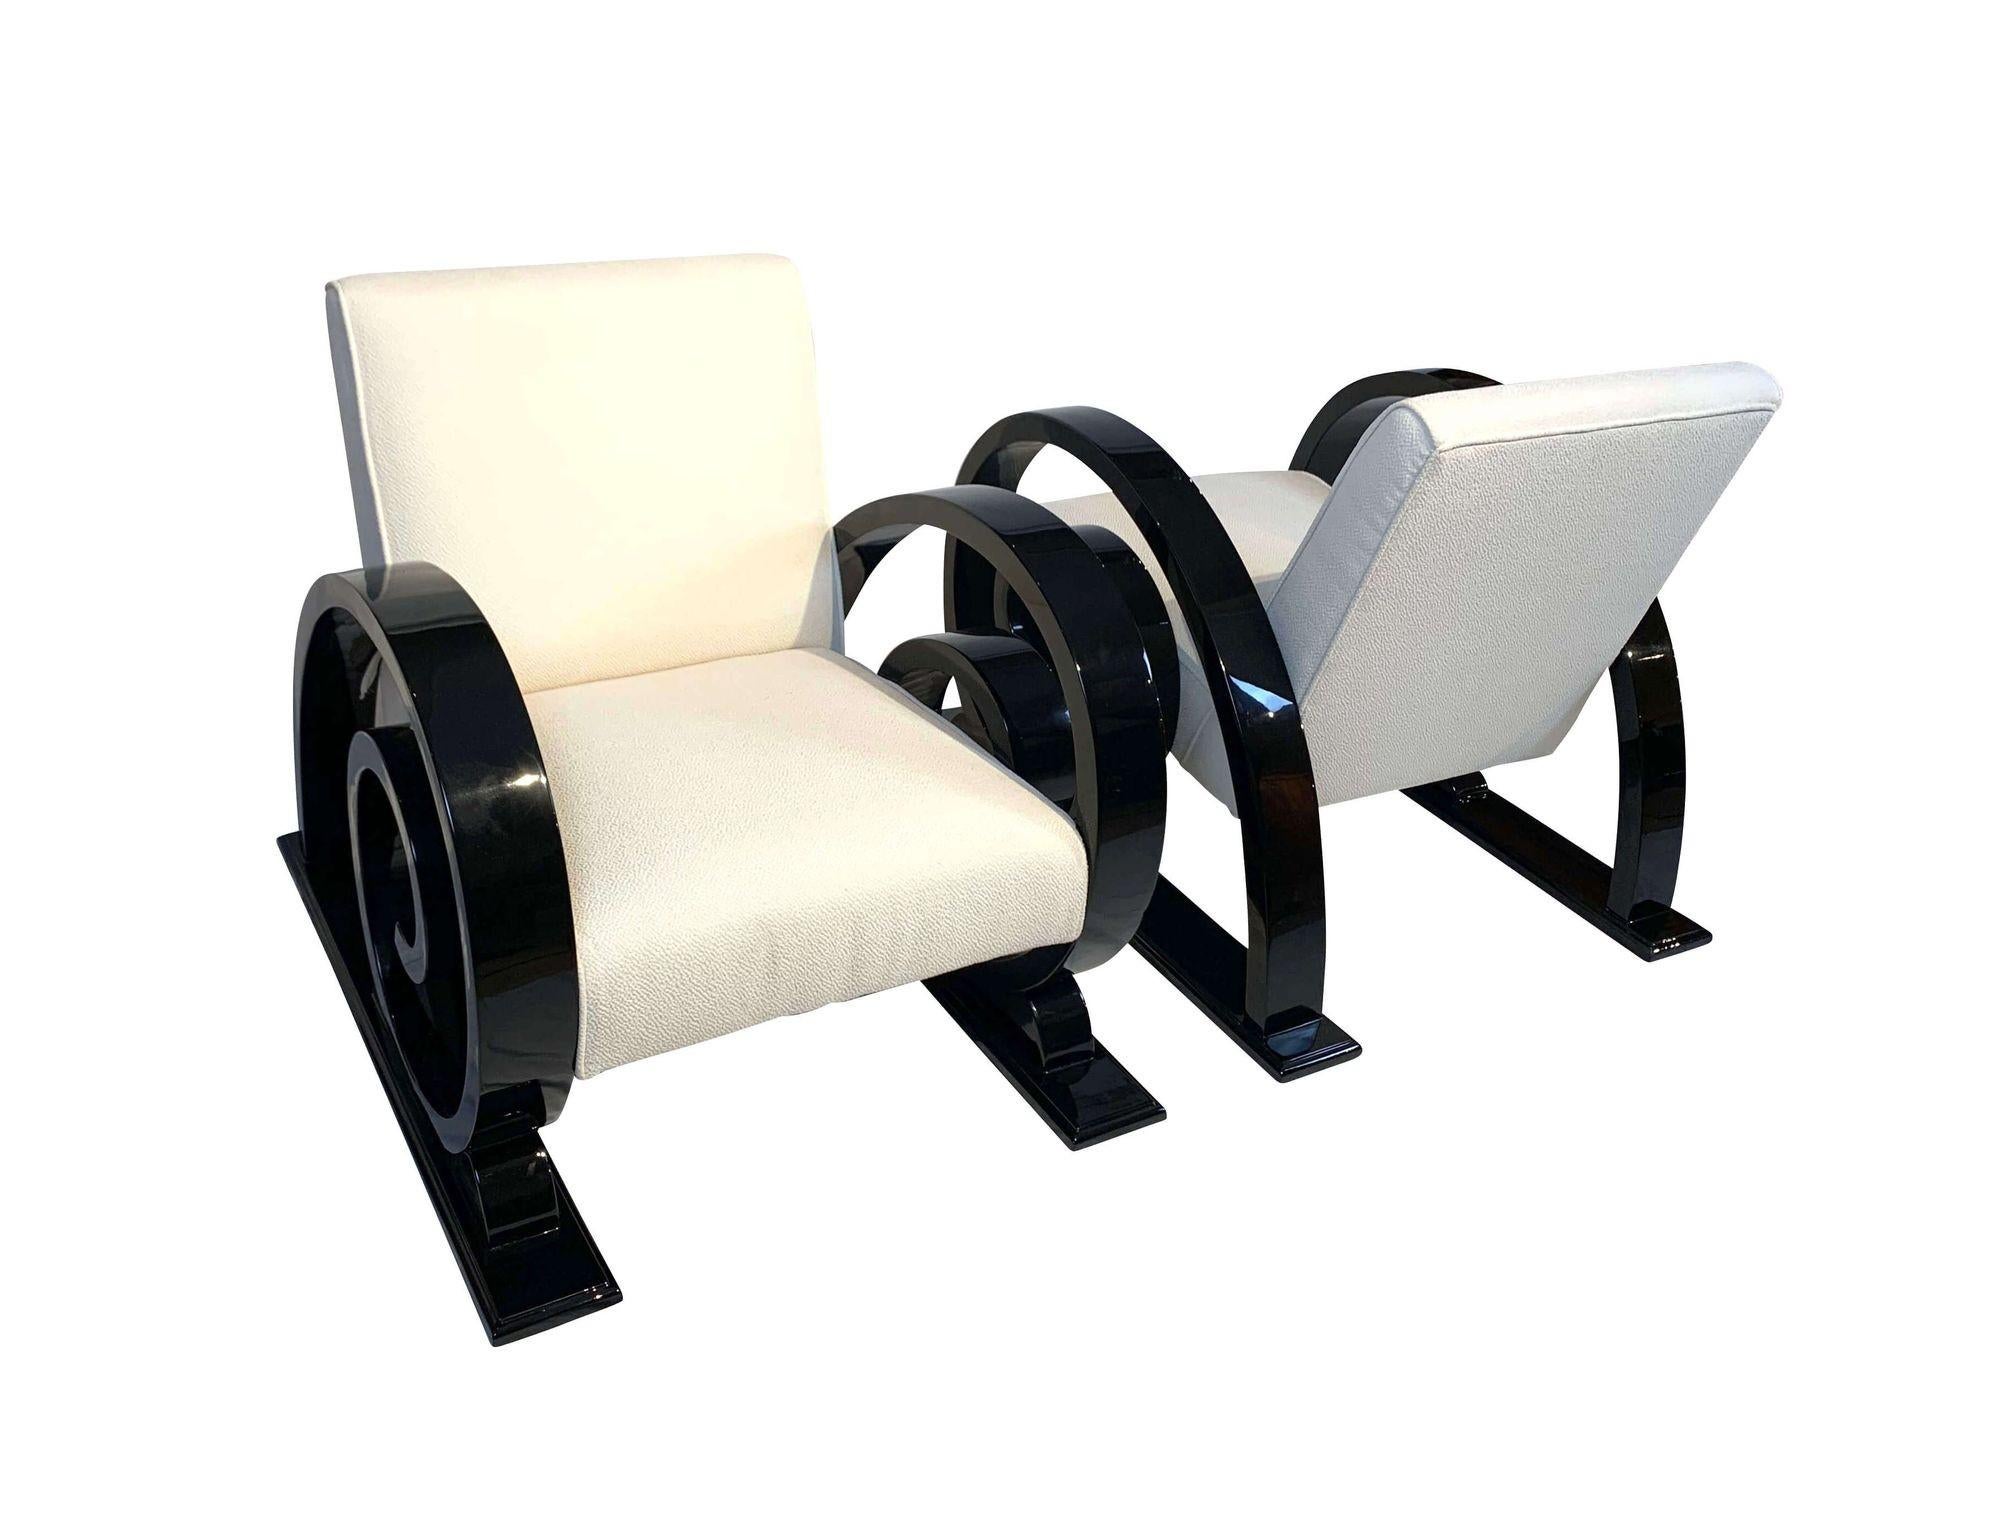 Set of two Art Deco club chairs, black lacquer, creme fabric, France circa 1930

Beautiful Pair of extraordinary and very rare, original Art Deco Club Chairs with volute / spirals / helical sides or armrests on runners.
Provenience: France around